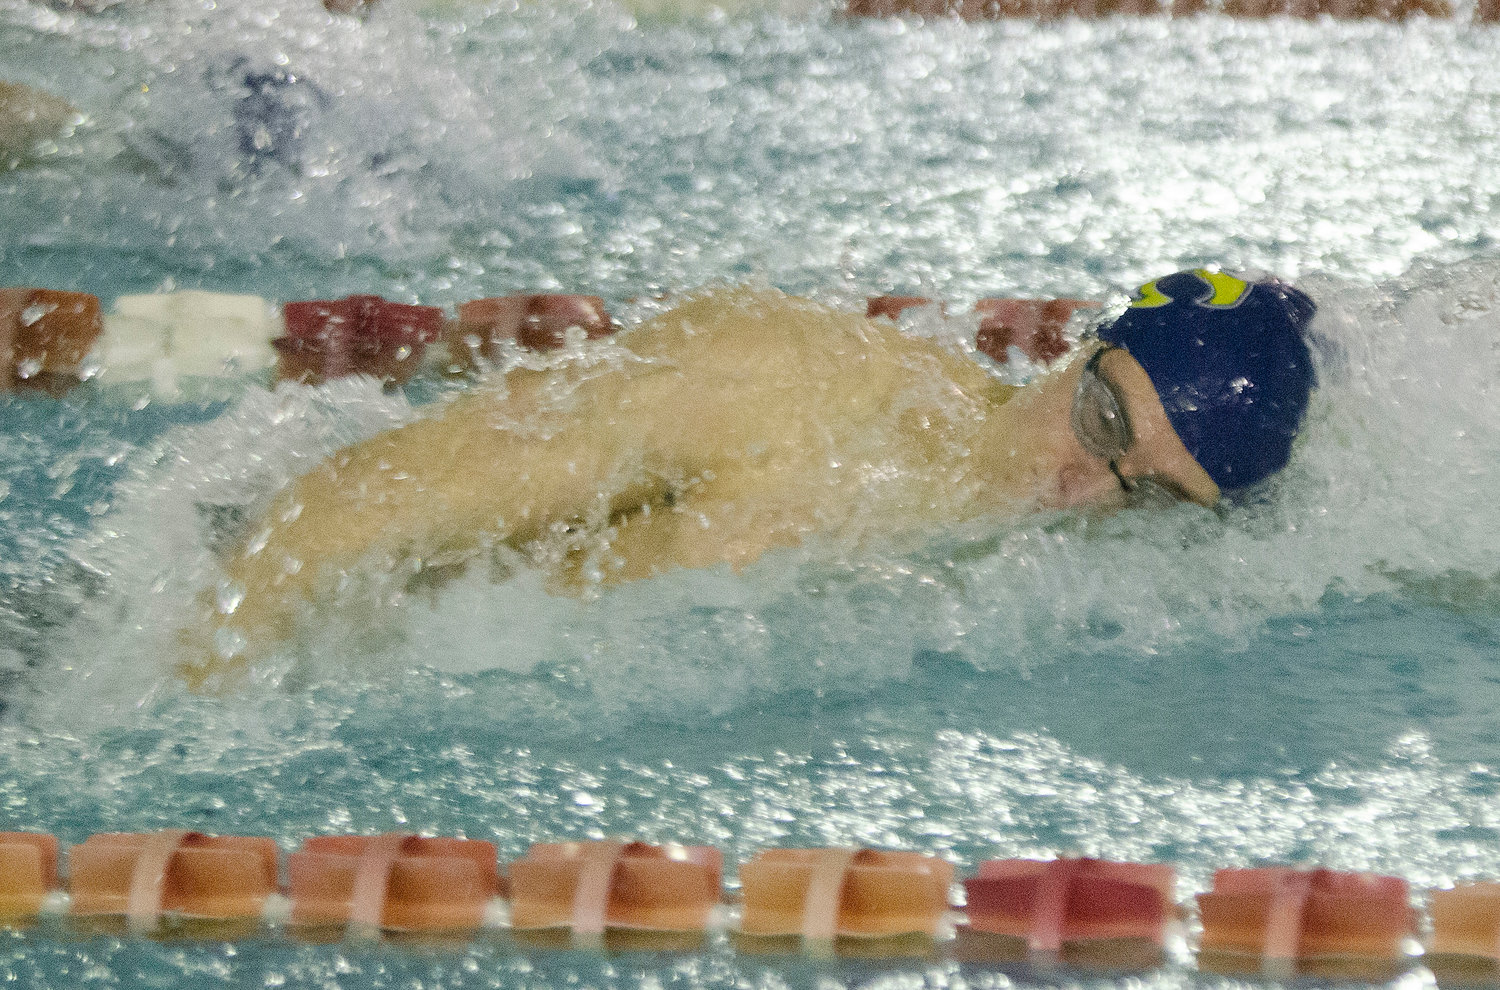 William McClelland competes in the 100 freestyle race.